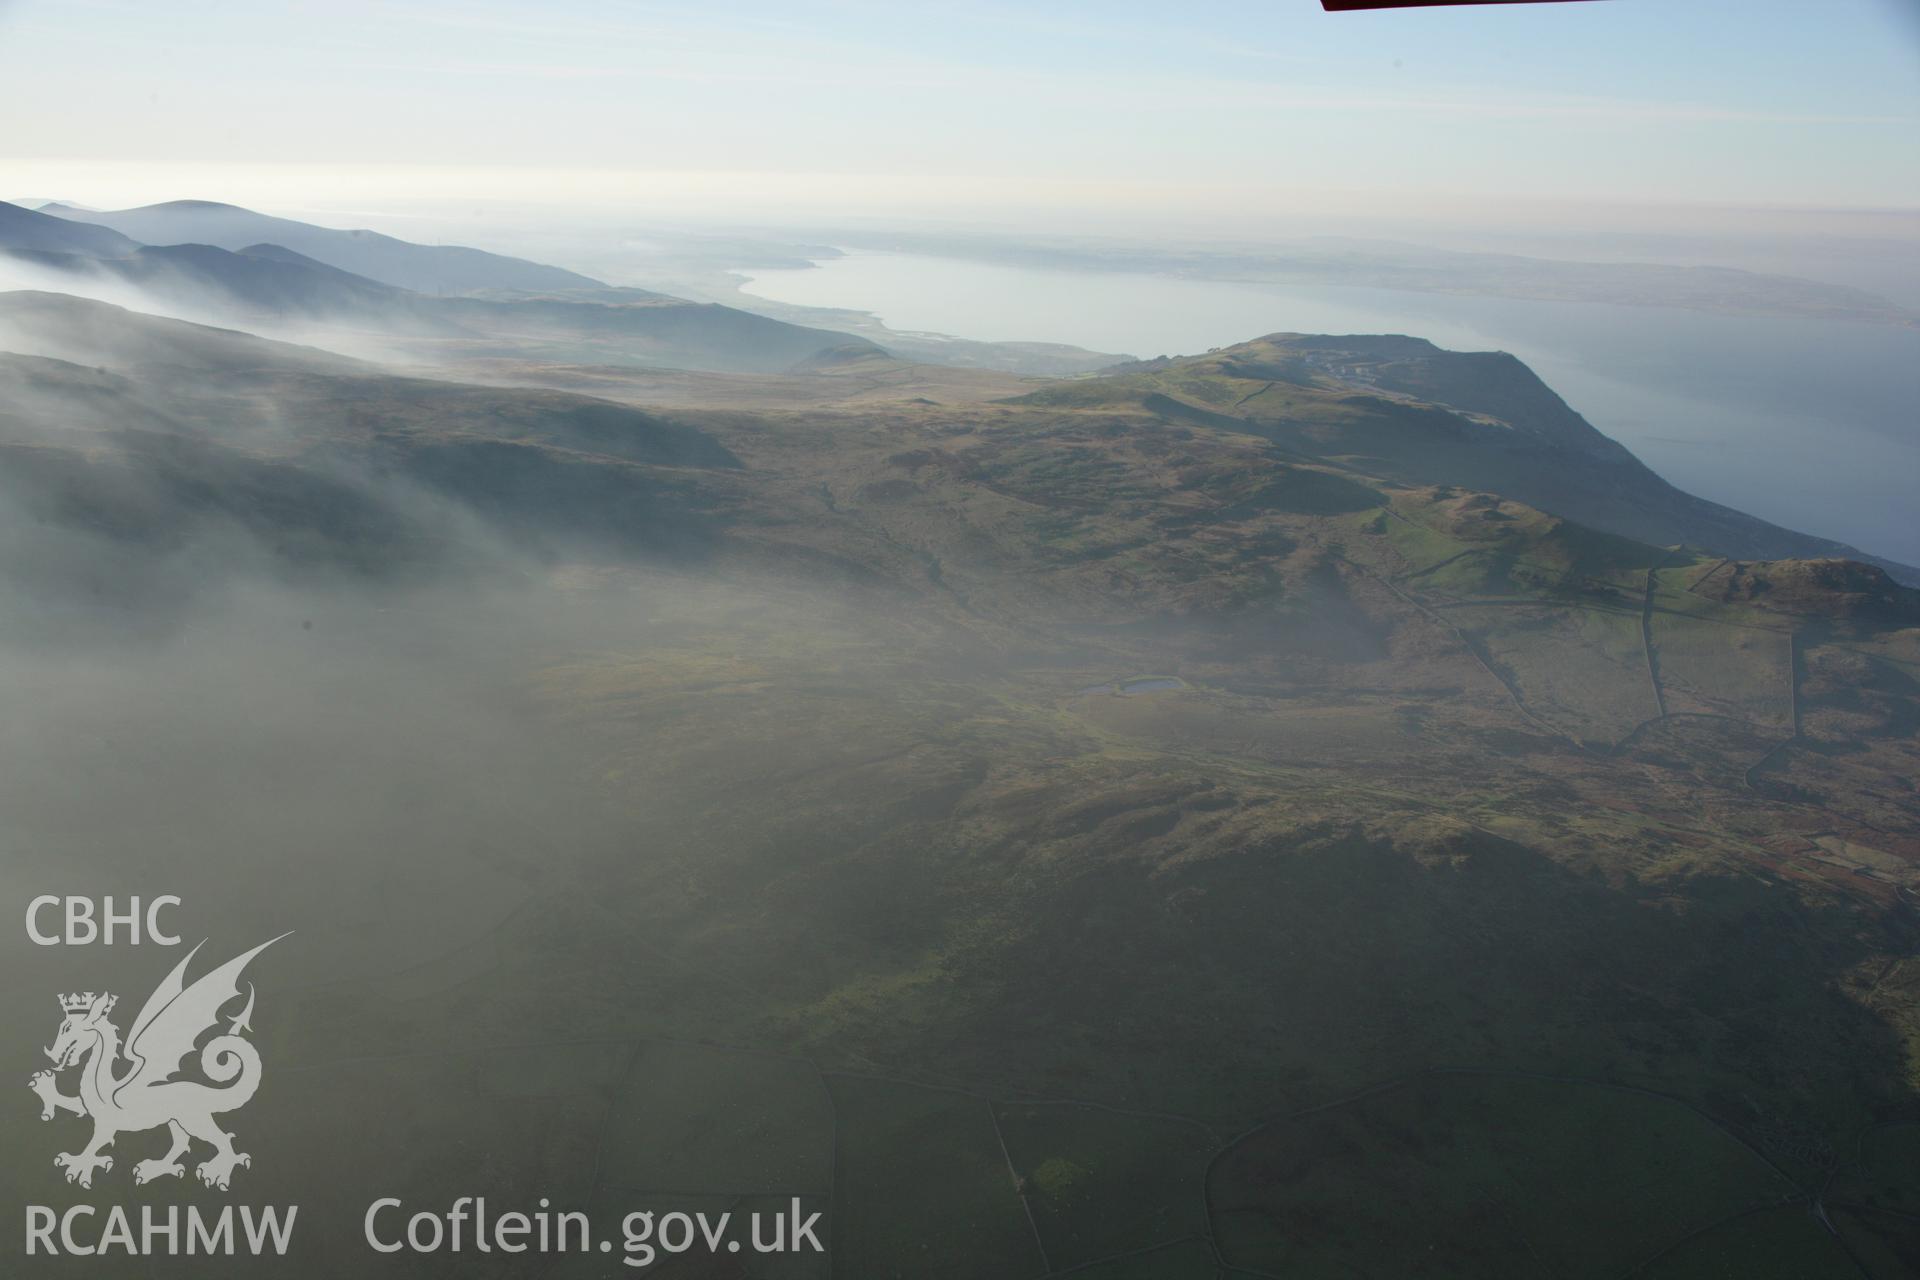 RCAHMW colour oblique aerial photograph of Braich-y-Dinas Hillfort, Penmaenmawr. A winter view of the surrounding upland landscape looking west. Taken on 21 November 2005 by Toby Driver